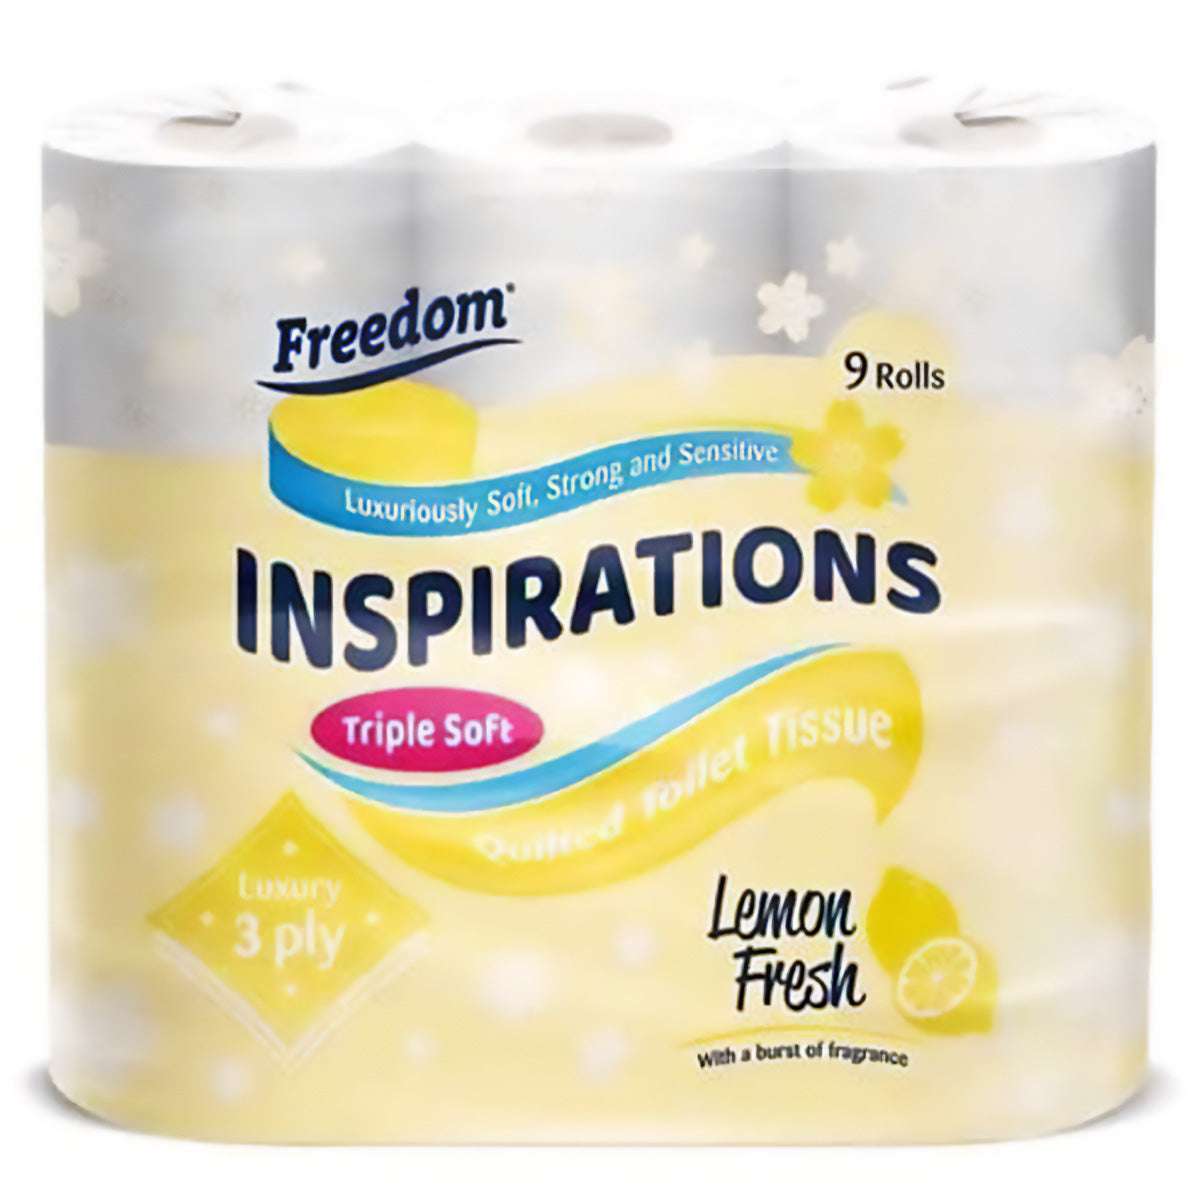 Freedom - Inspirations Soft Quilt Lemon Fresh Toilet Paper - 9 Rolls - Continental Food Store